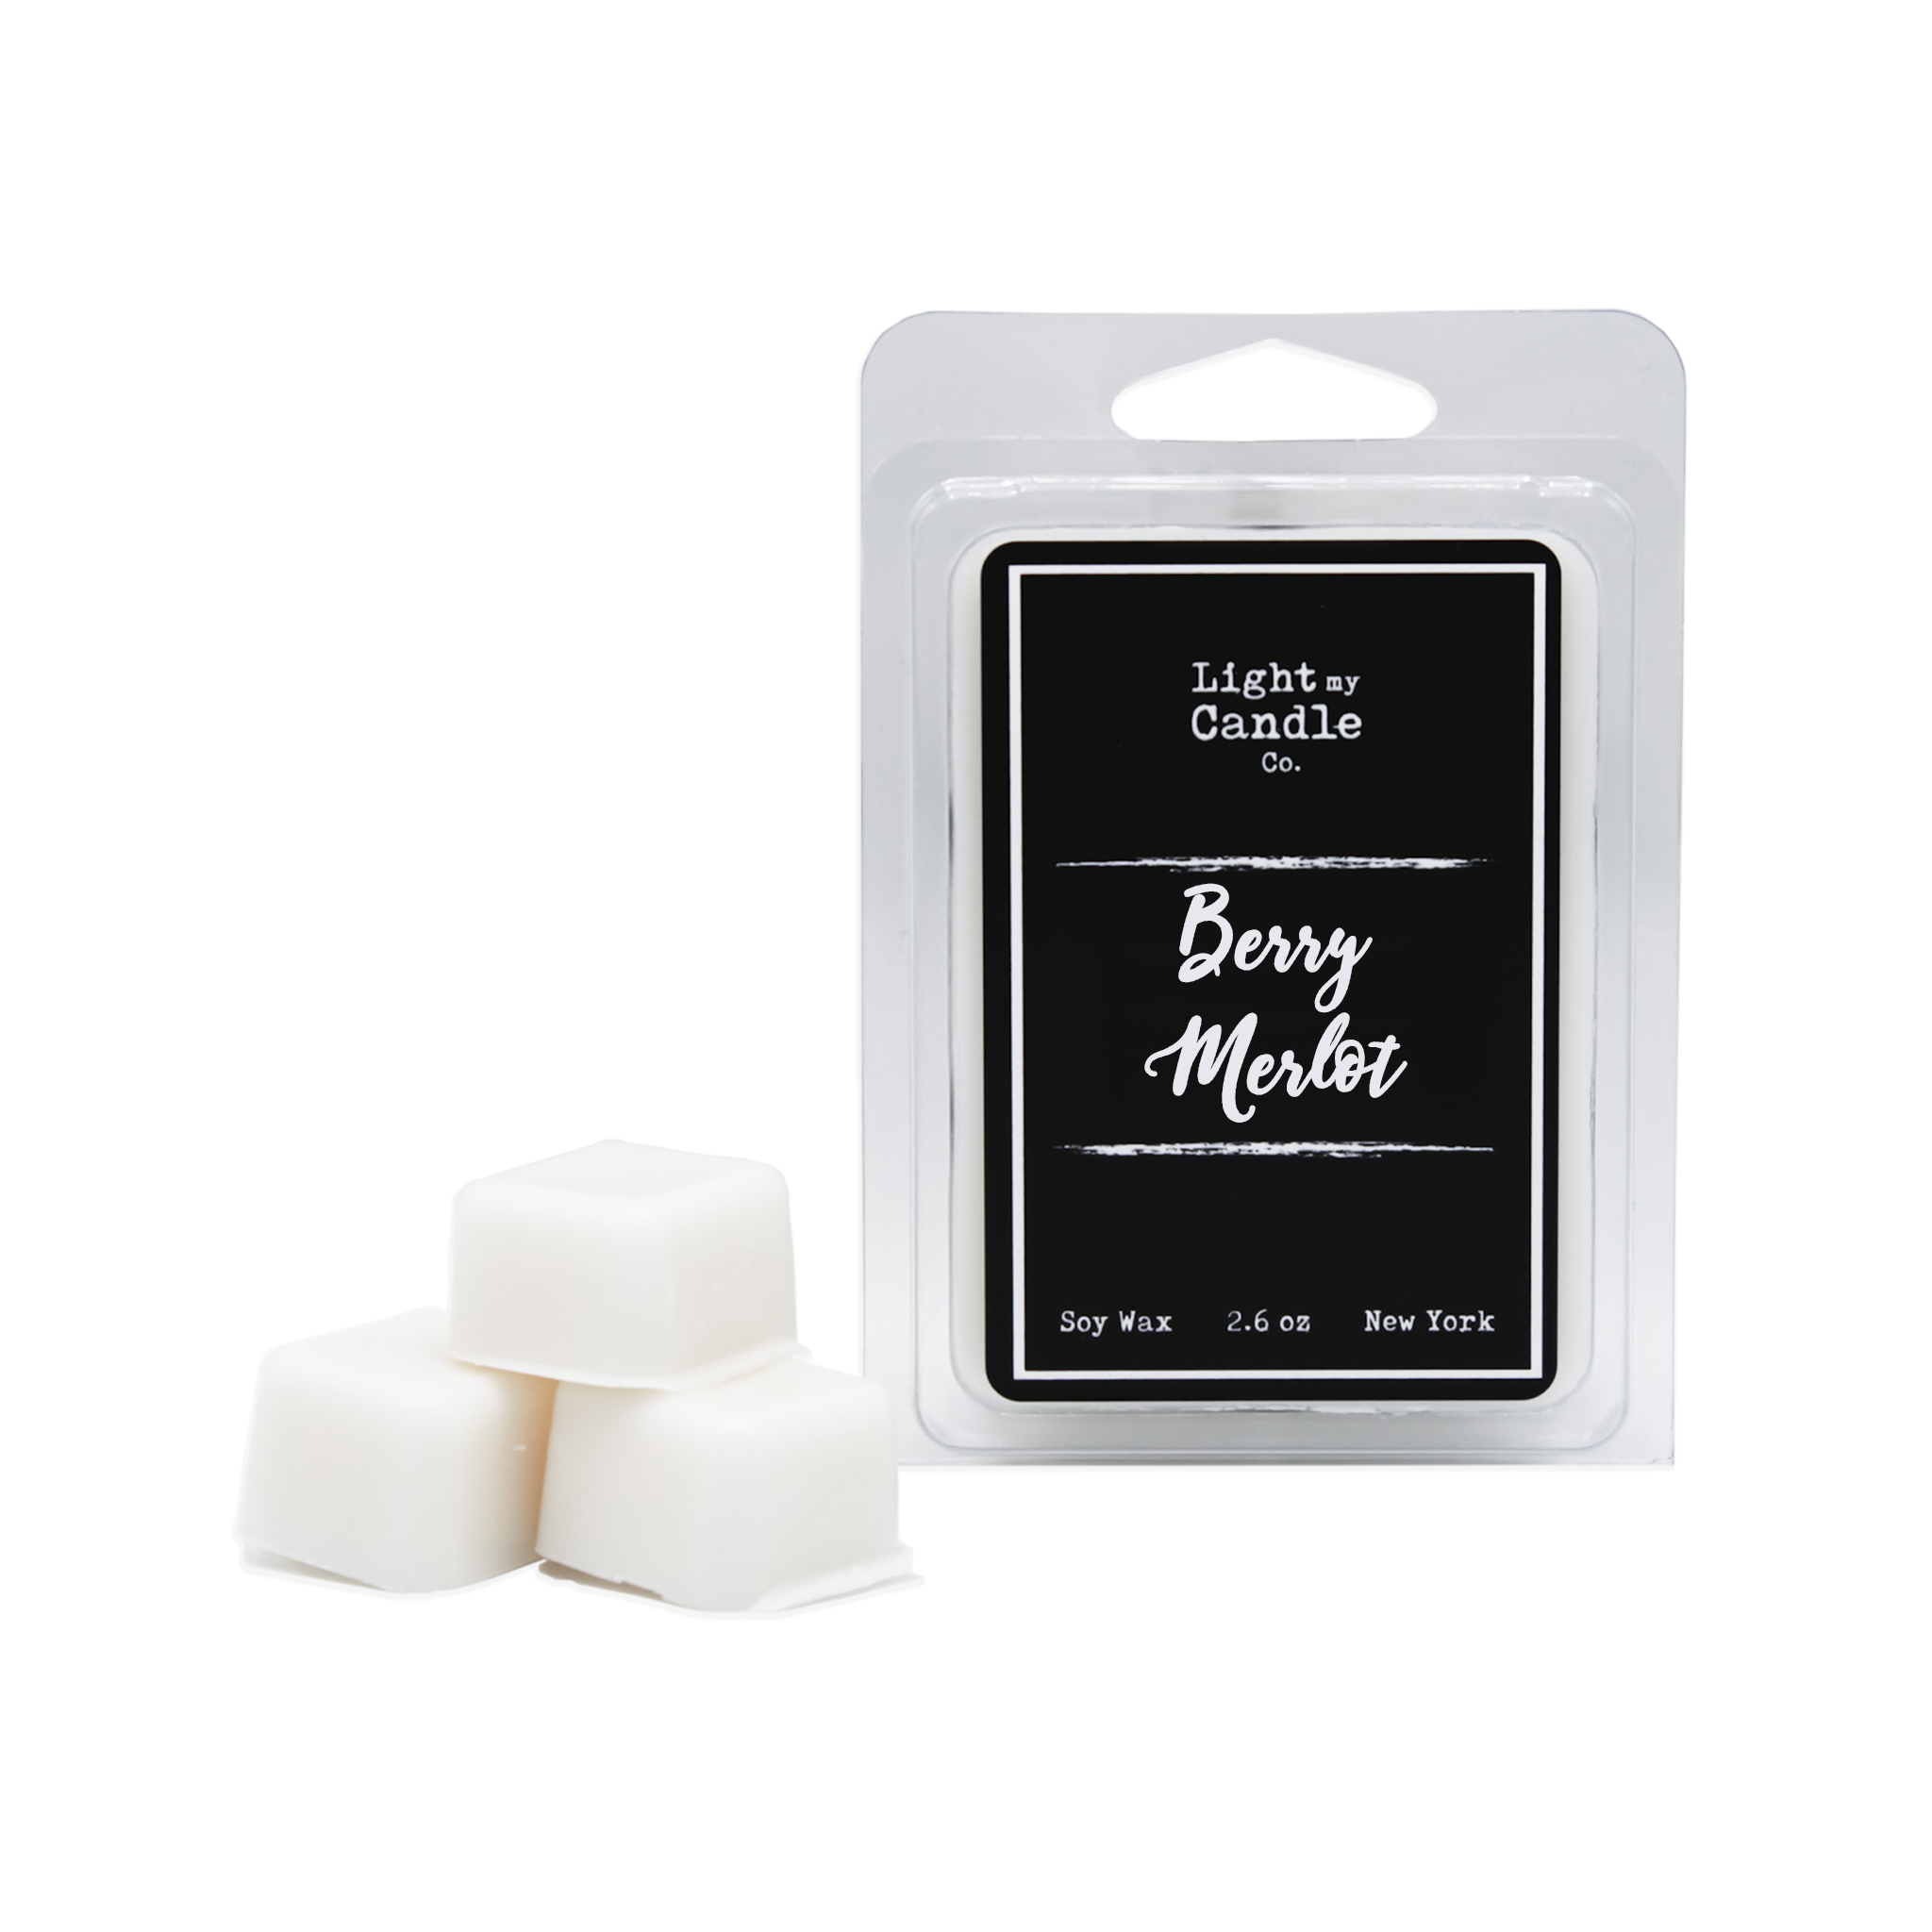 Berry Merlot Soy Wax Melts – Light My Candle Co.